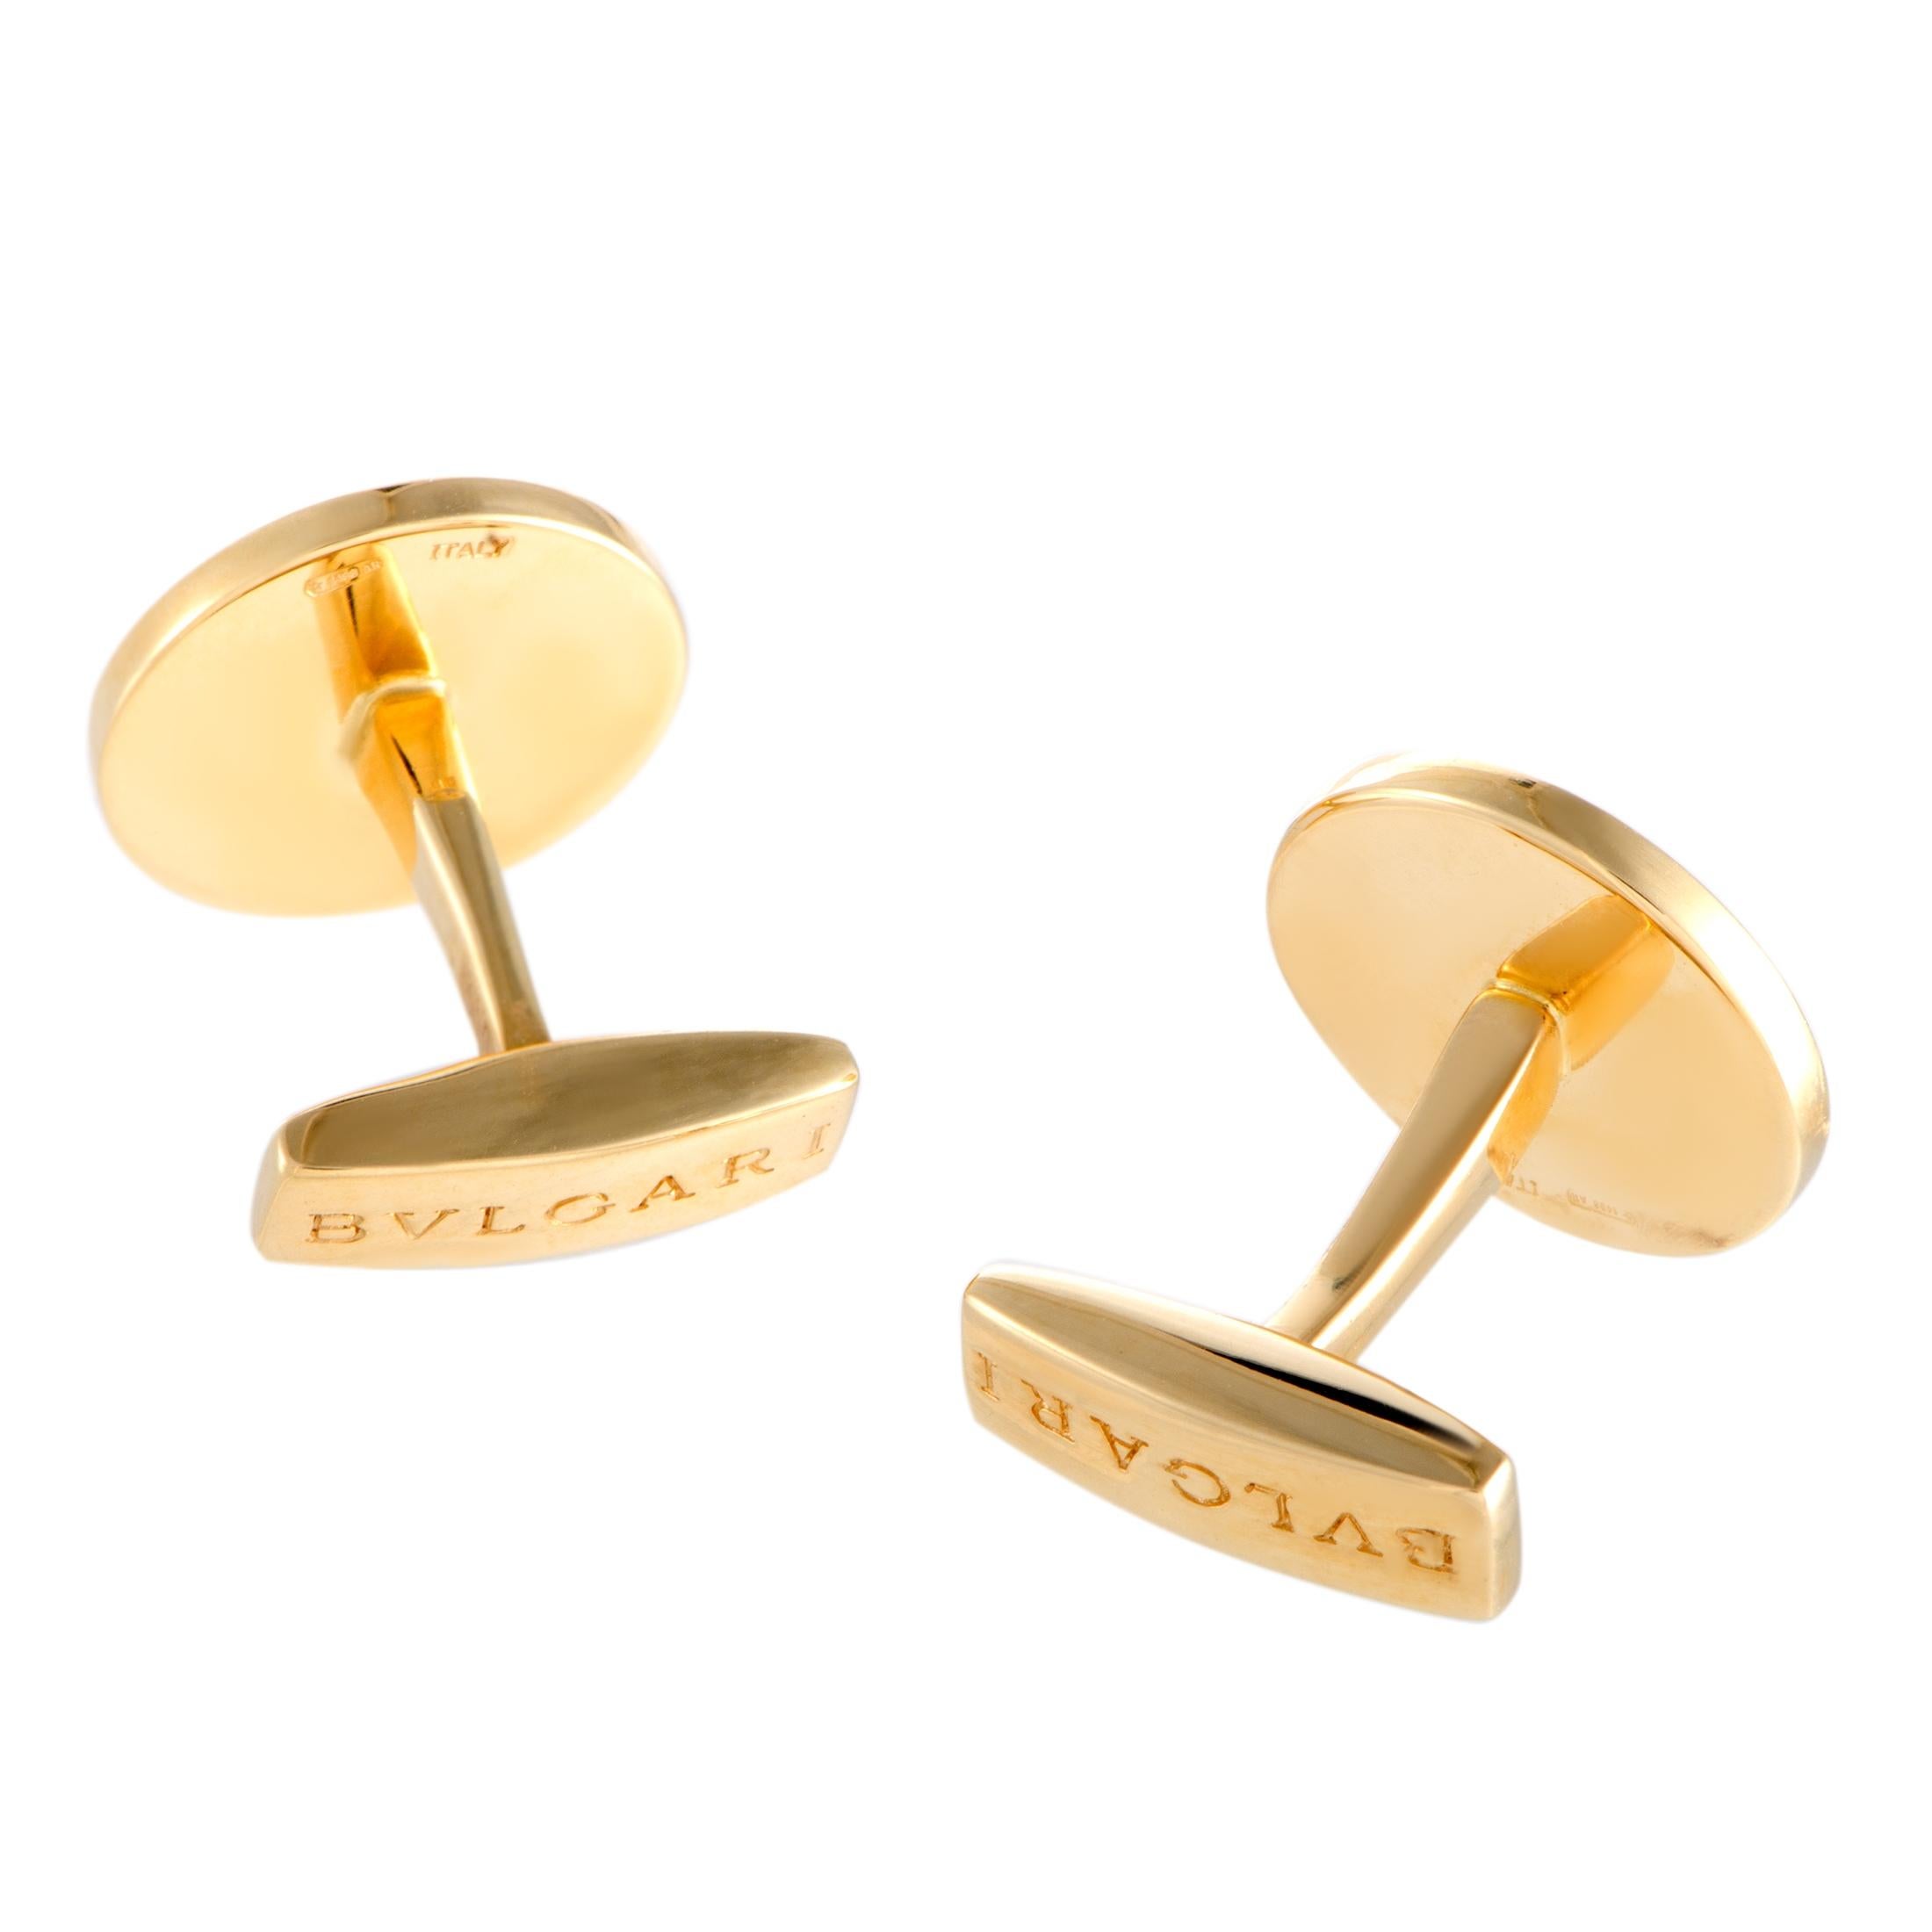 These classy cufflinks by Bulgari compel with their remarkable design. The glamorous pair features a gold circle engraved with the characteristic double logo 